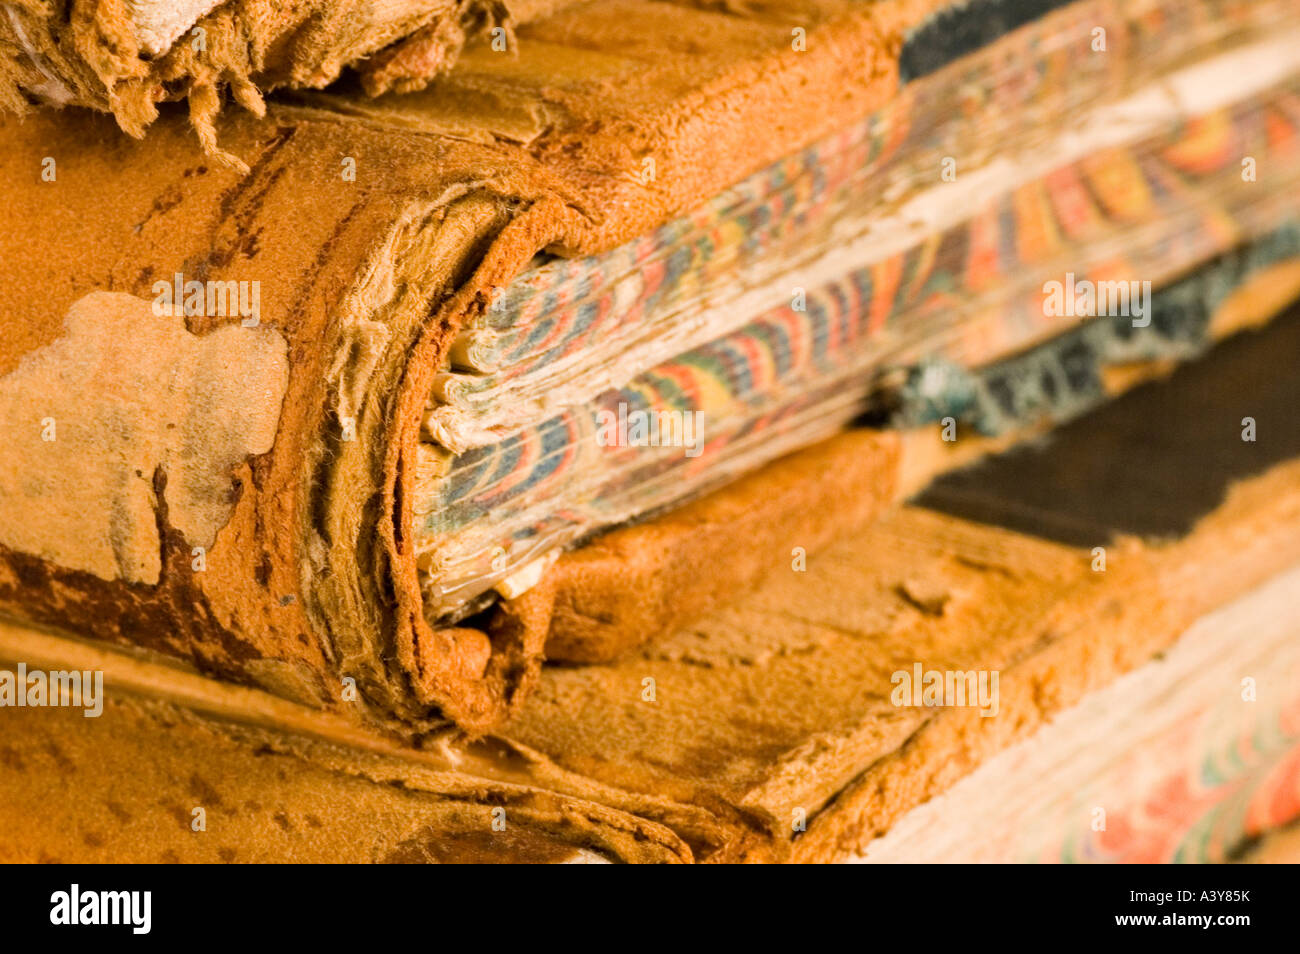 old-accounting-volume-stock-photo-alamy